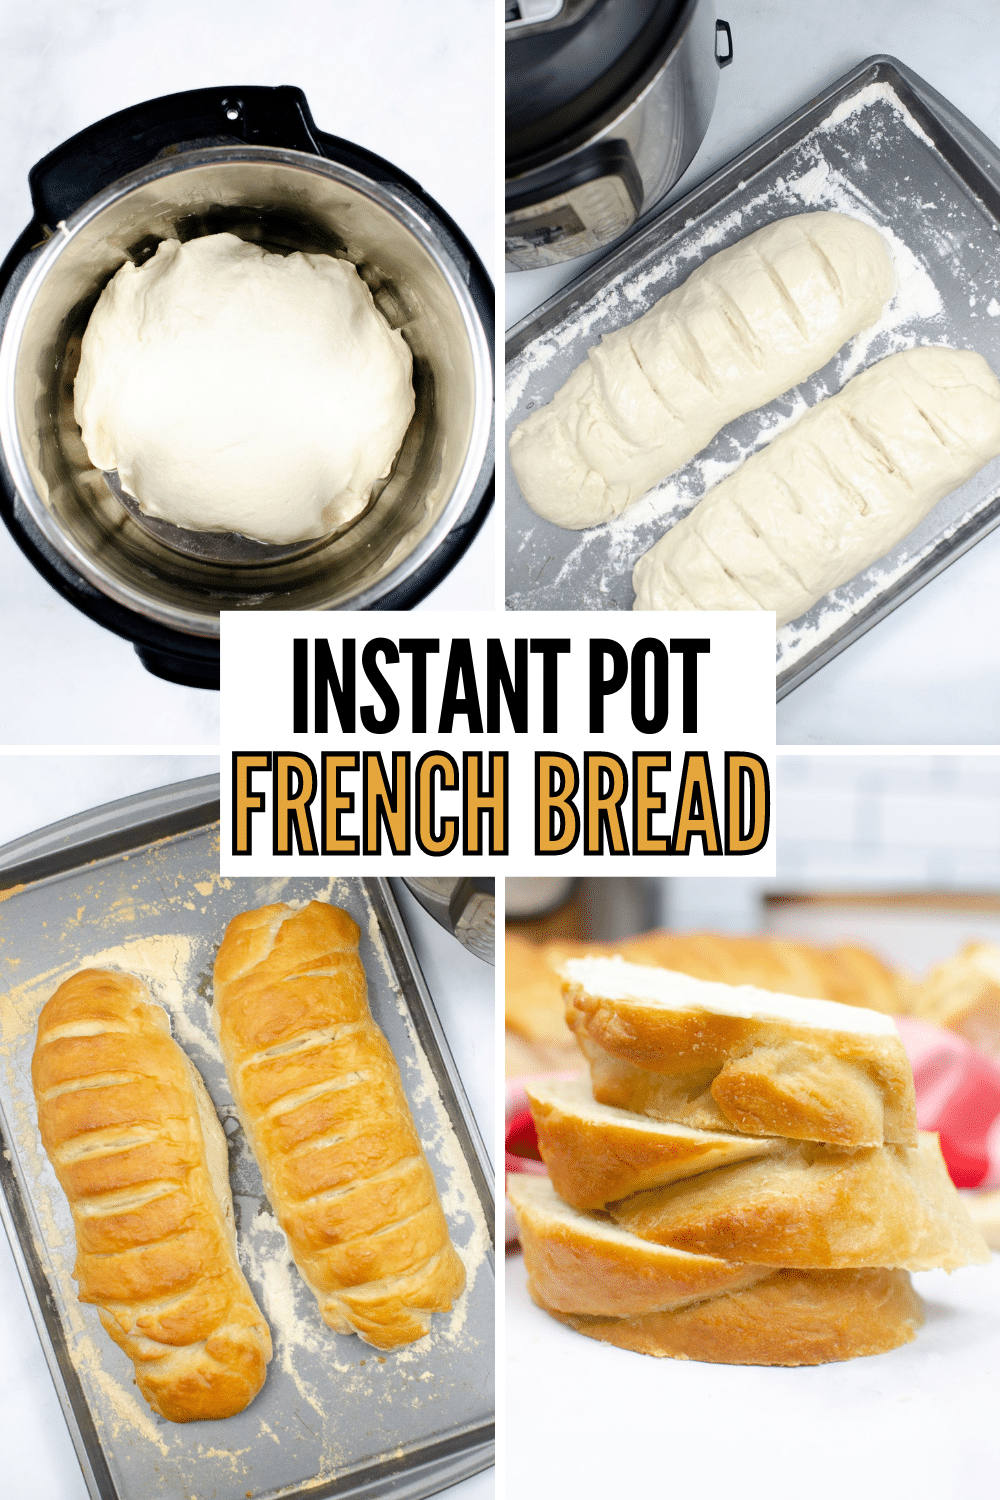 Instant Pot French Bread is crusty on the outside and soft and chewy in the center. It makes a perfect side dish for so many meals! #instantpot #pressurecooker #frenchbread #recipe via @wondermomwannab